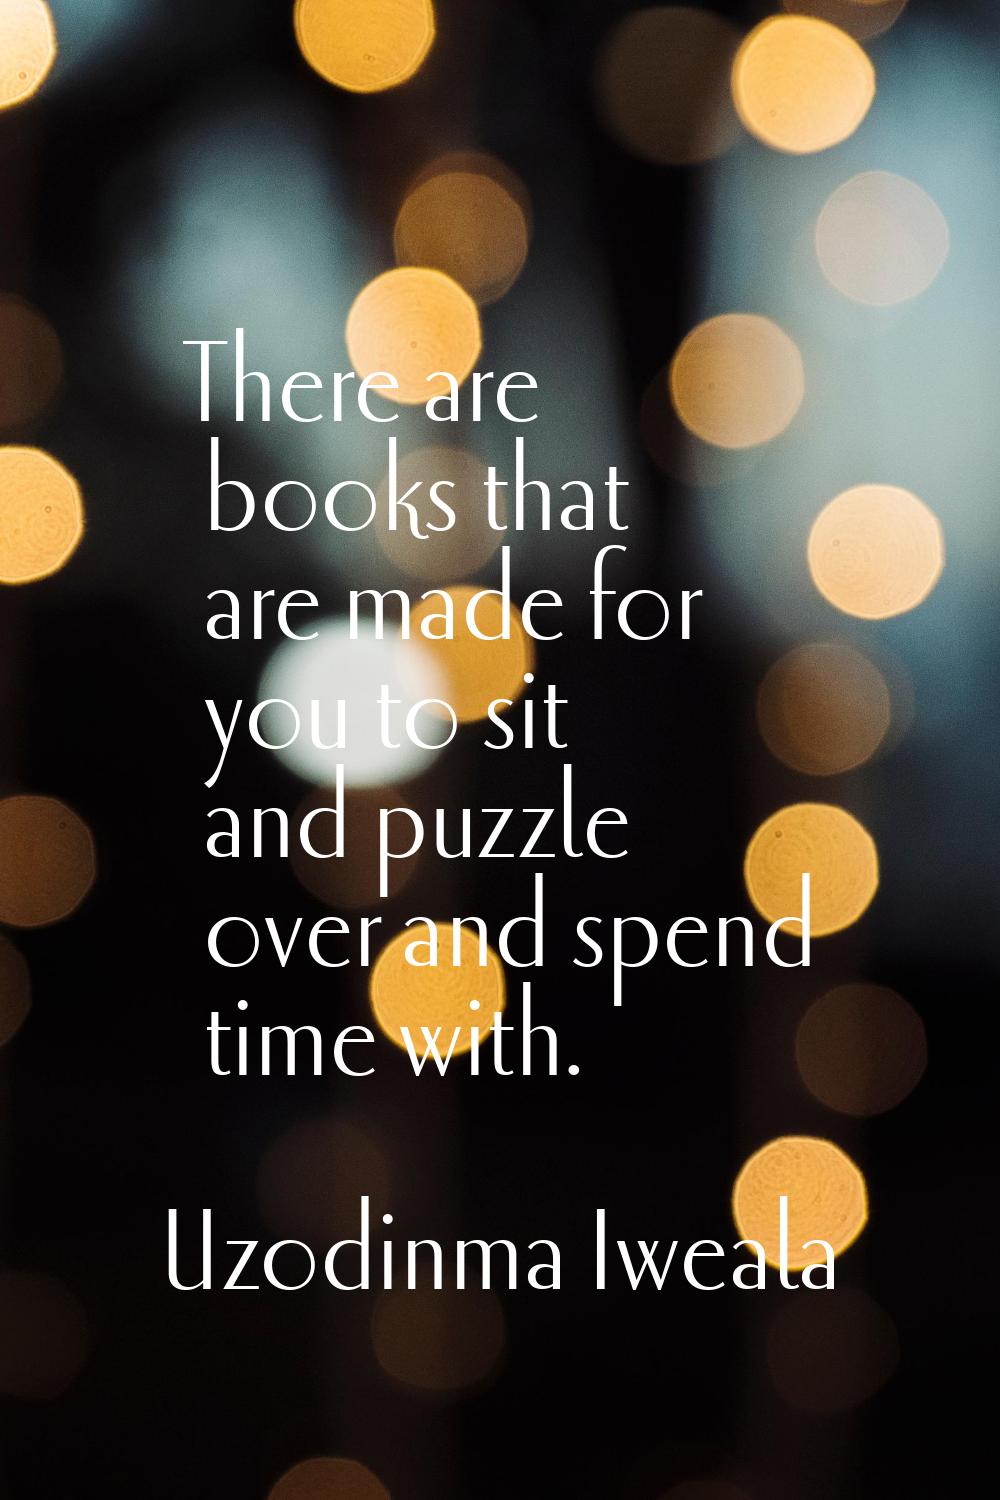 There are books that are made for you to sit and puzzle over and spend time with.